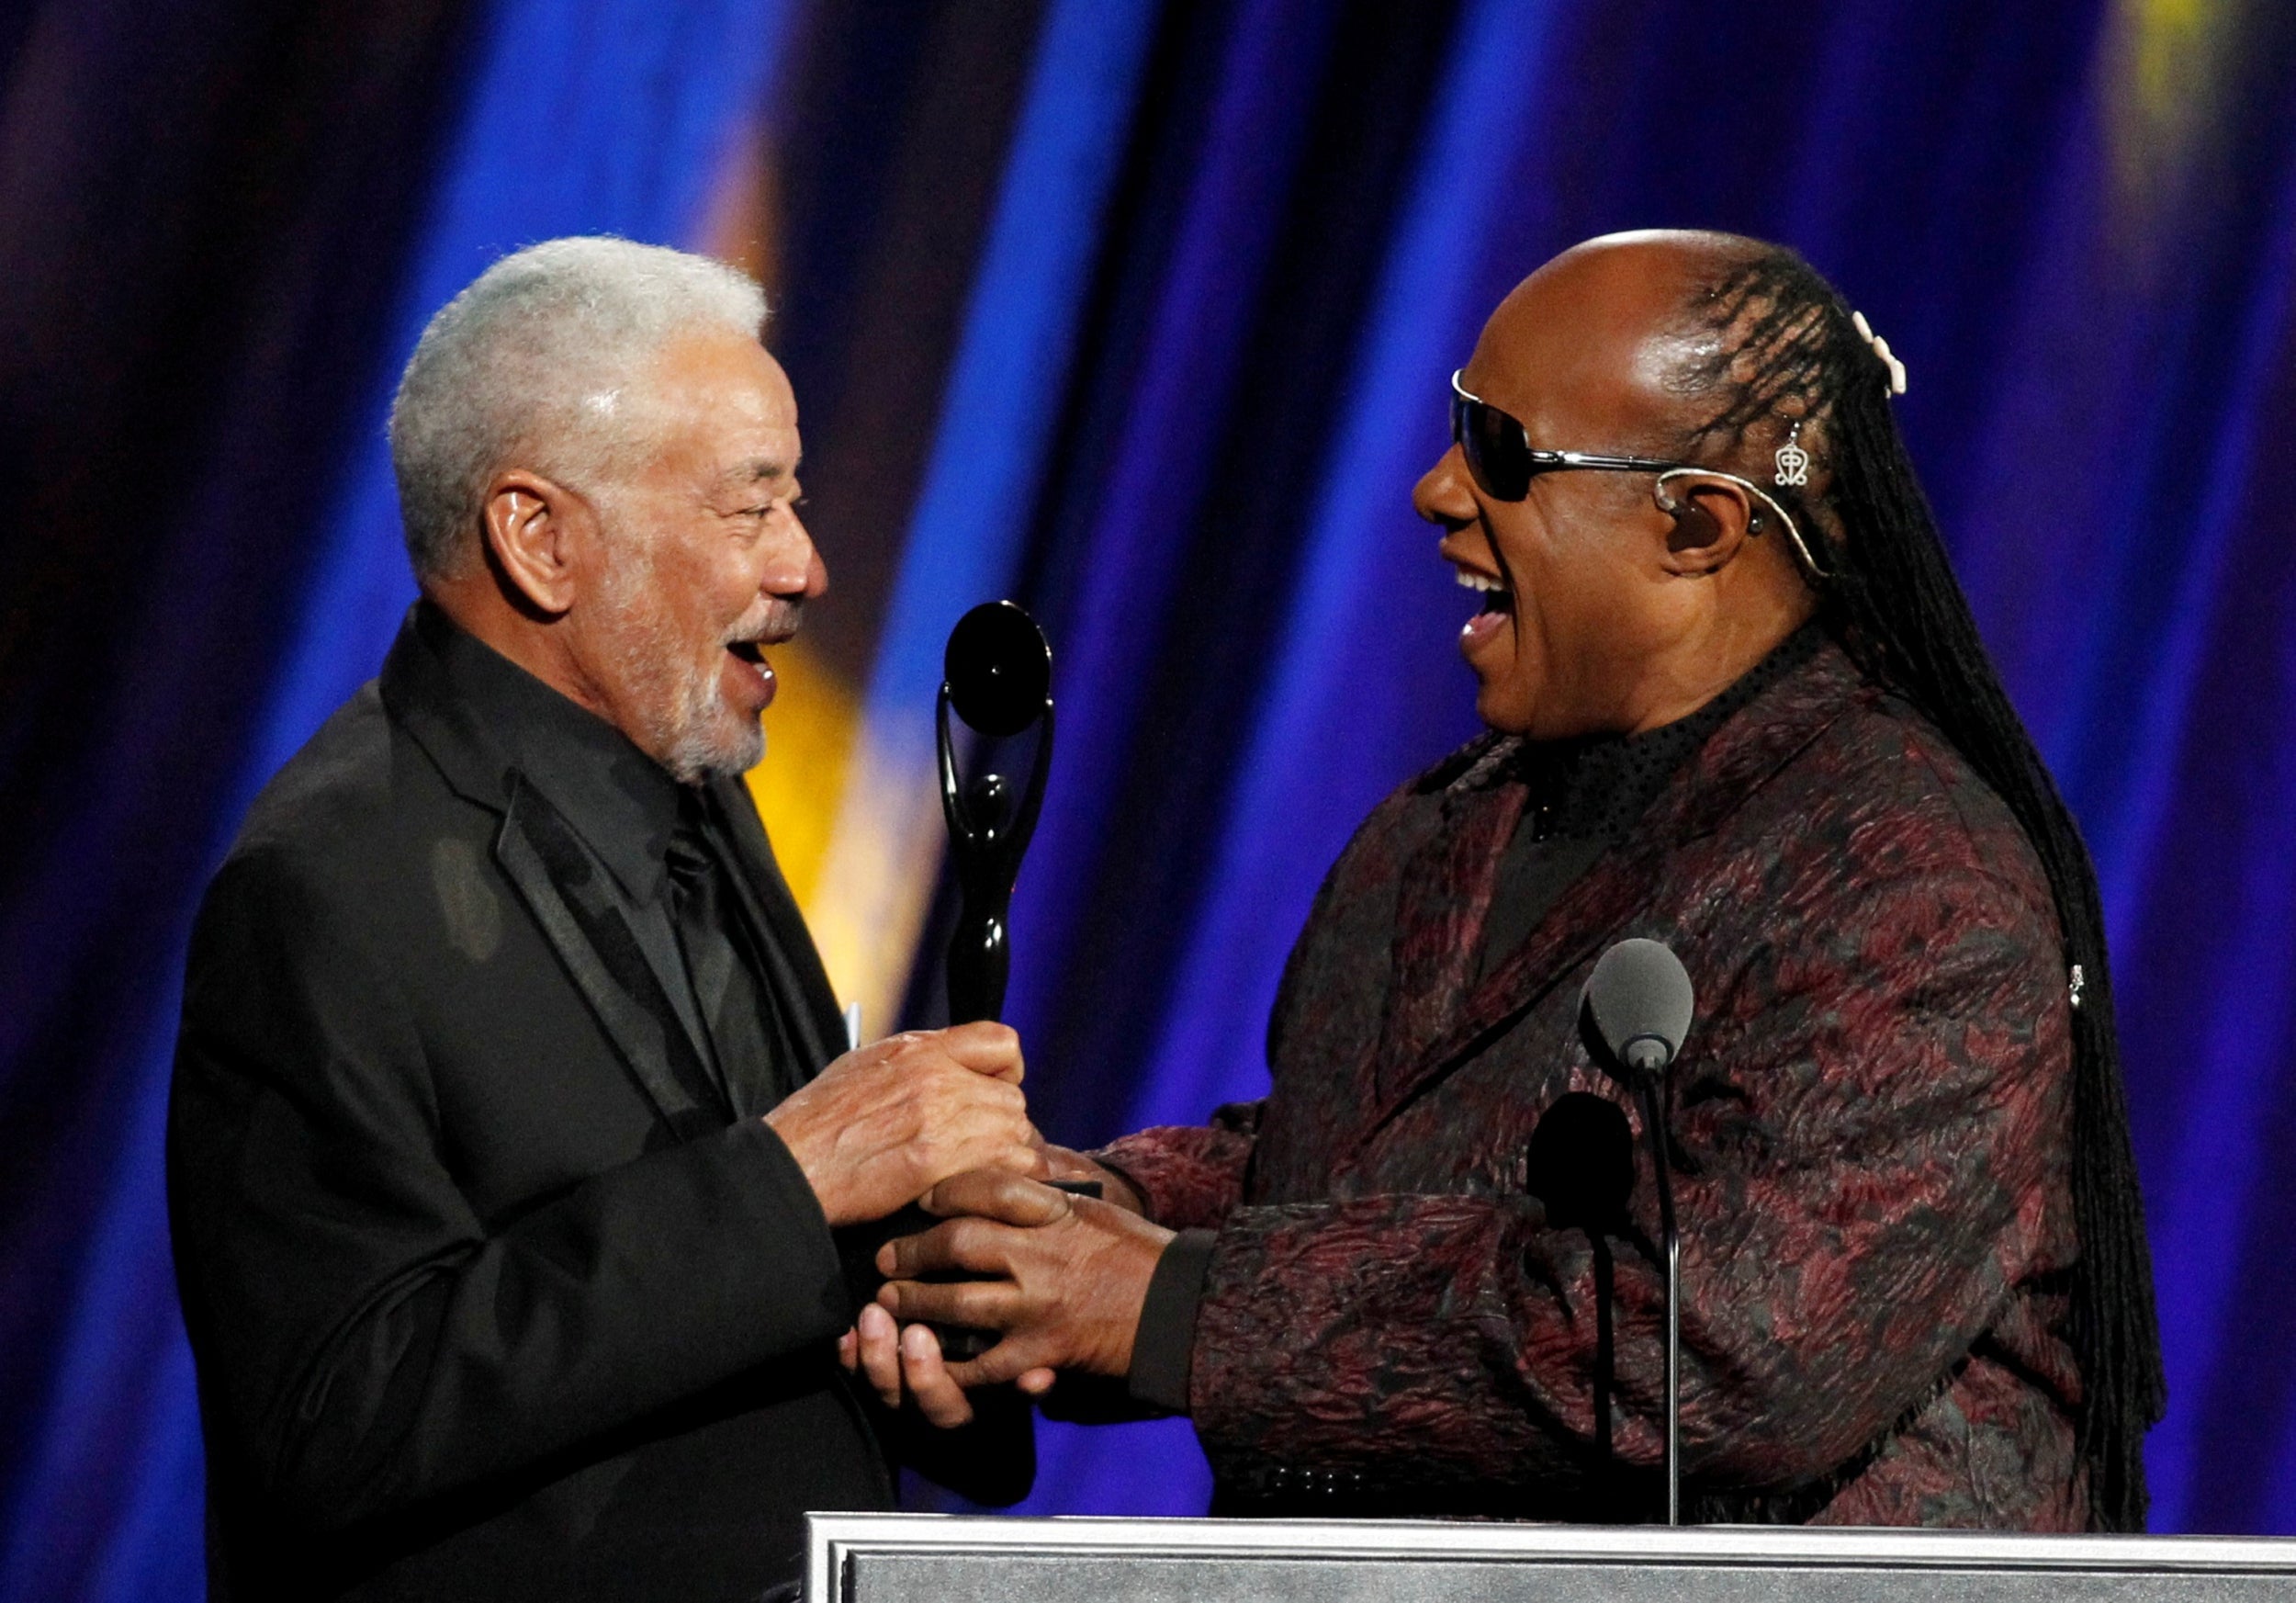 Withers is inducted by Stevie Wonder at the 2015 Rock and Roll Hall of Fame ceremony in Cleveland, Ohio